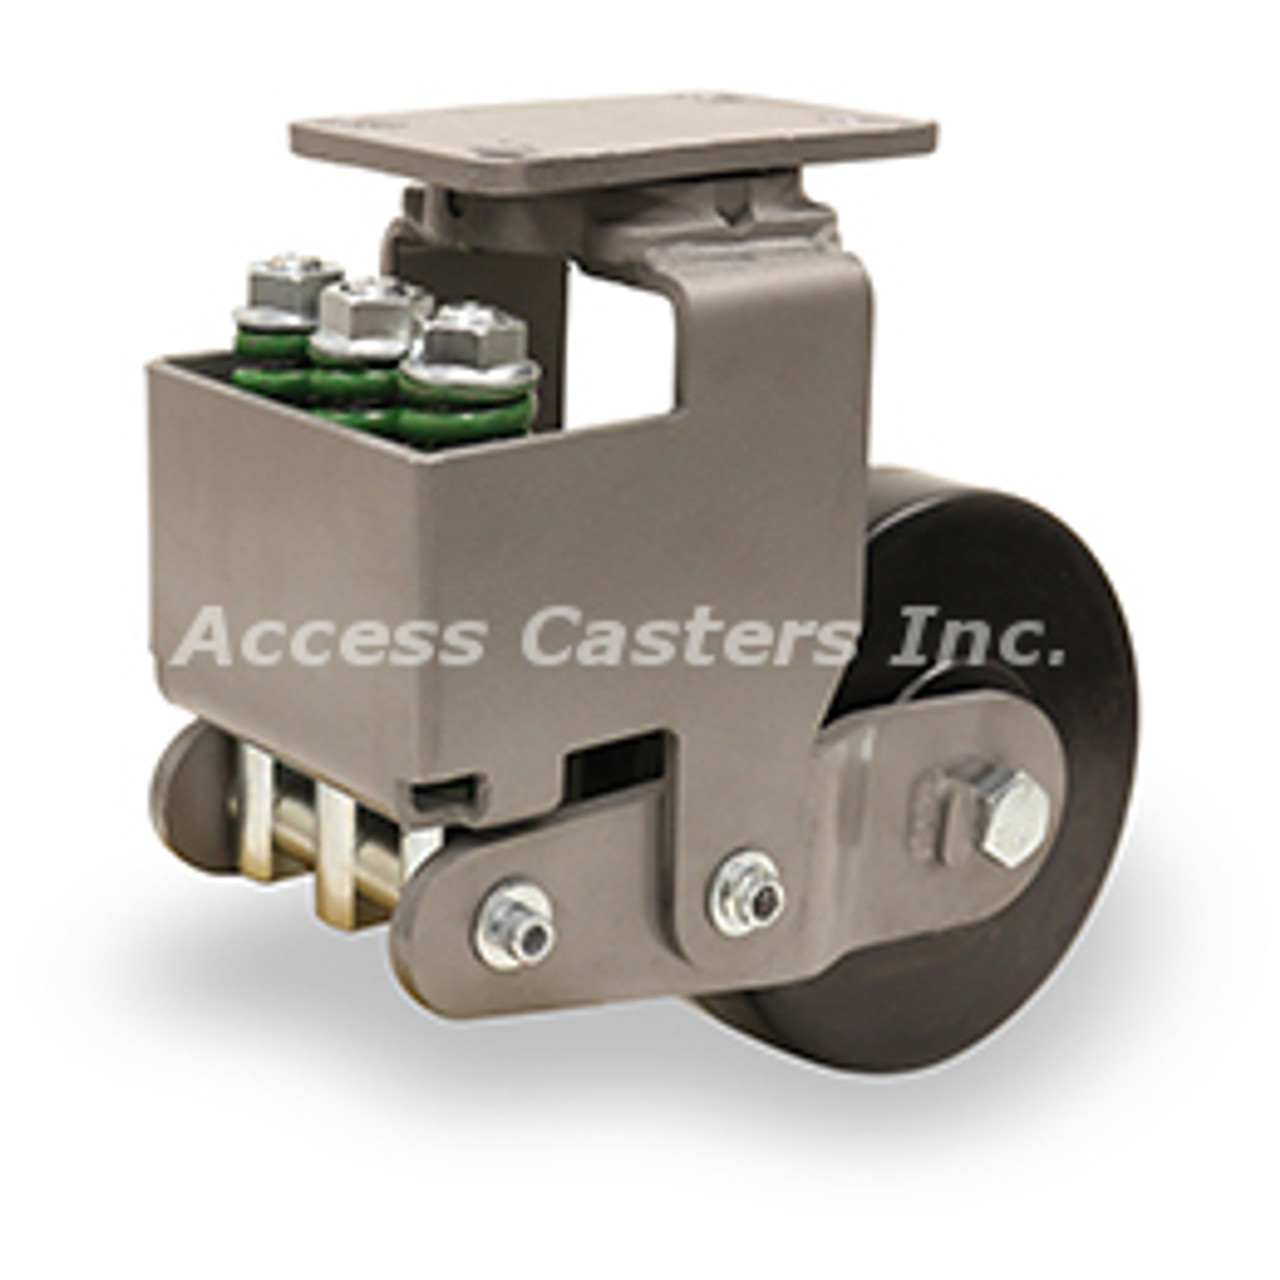 S-AEZFFM-63PH Spring loaded caster with 6" x 3" PH wheel